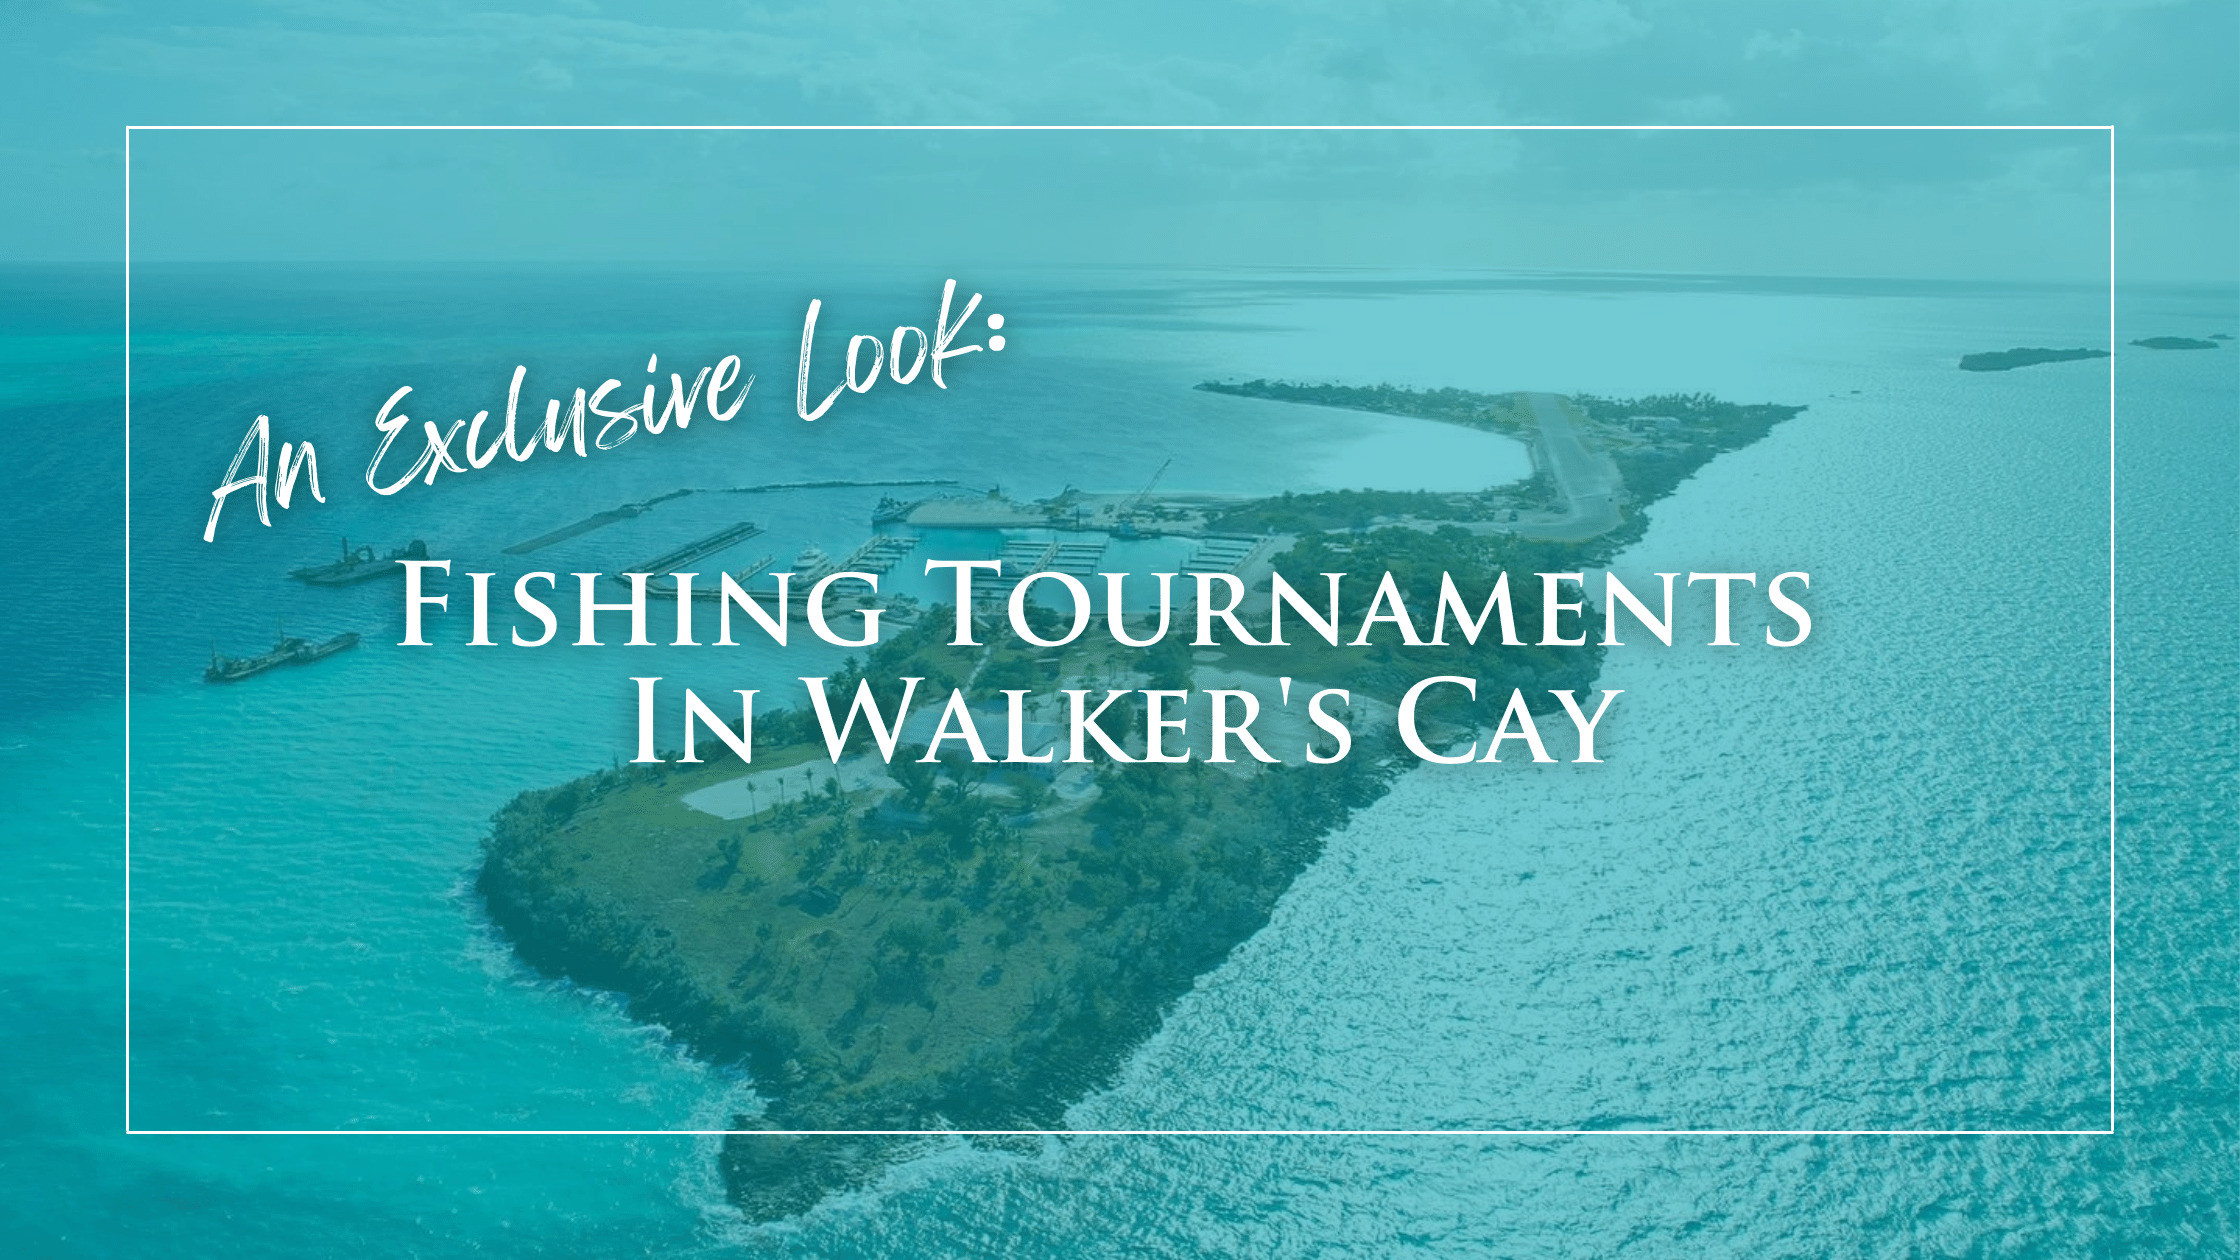 An Exclusive Look into the Walker’s Cay Fishing Tournaments